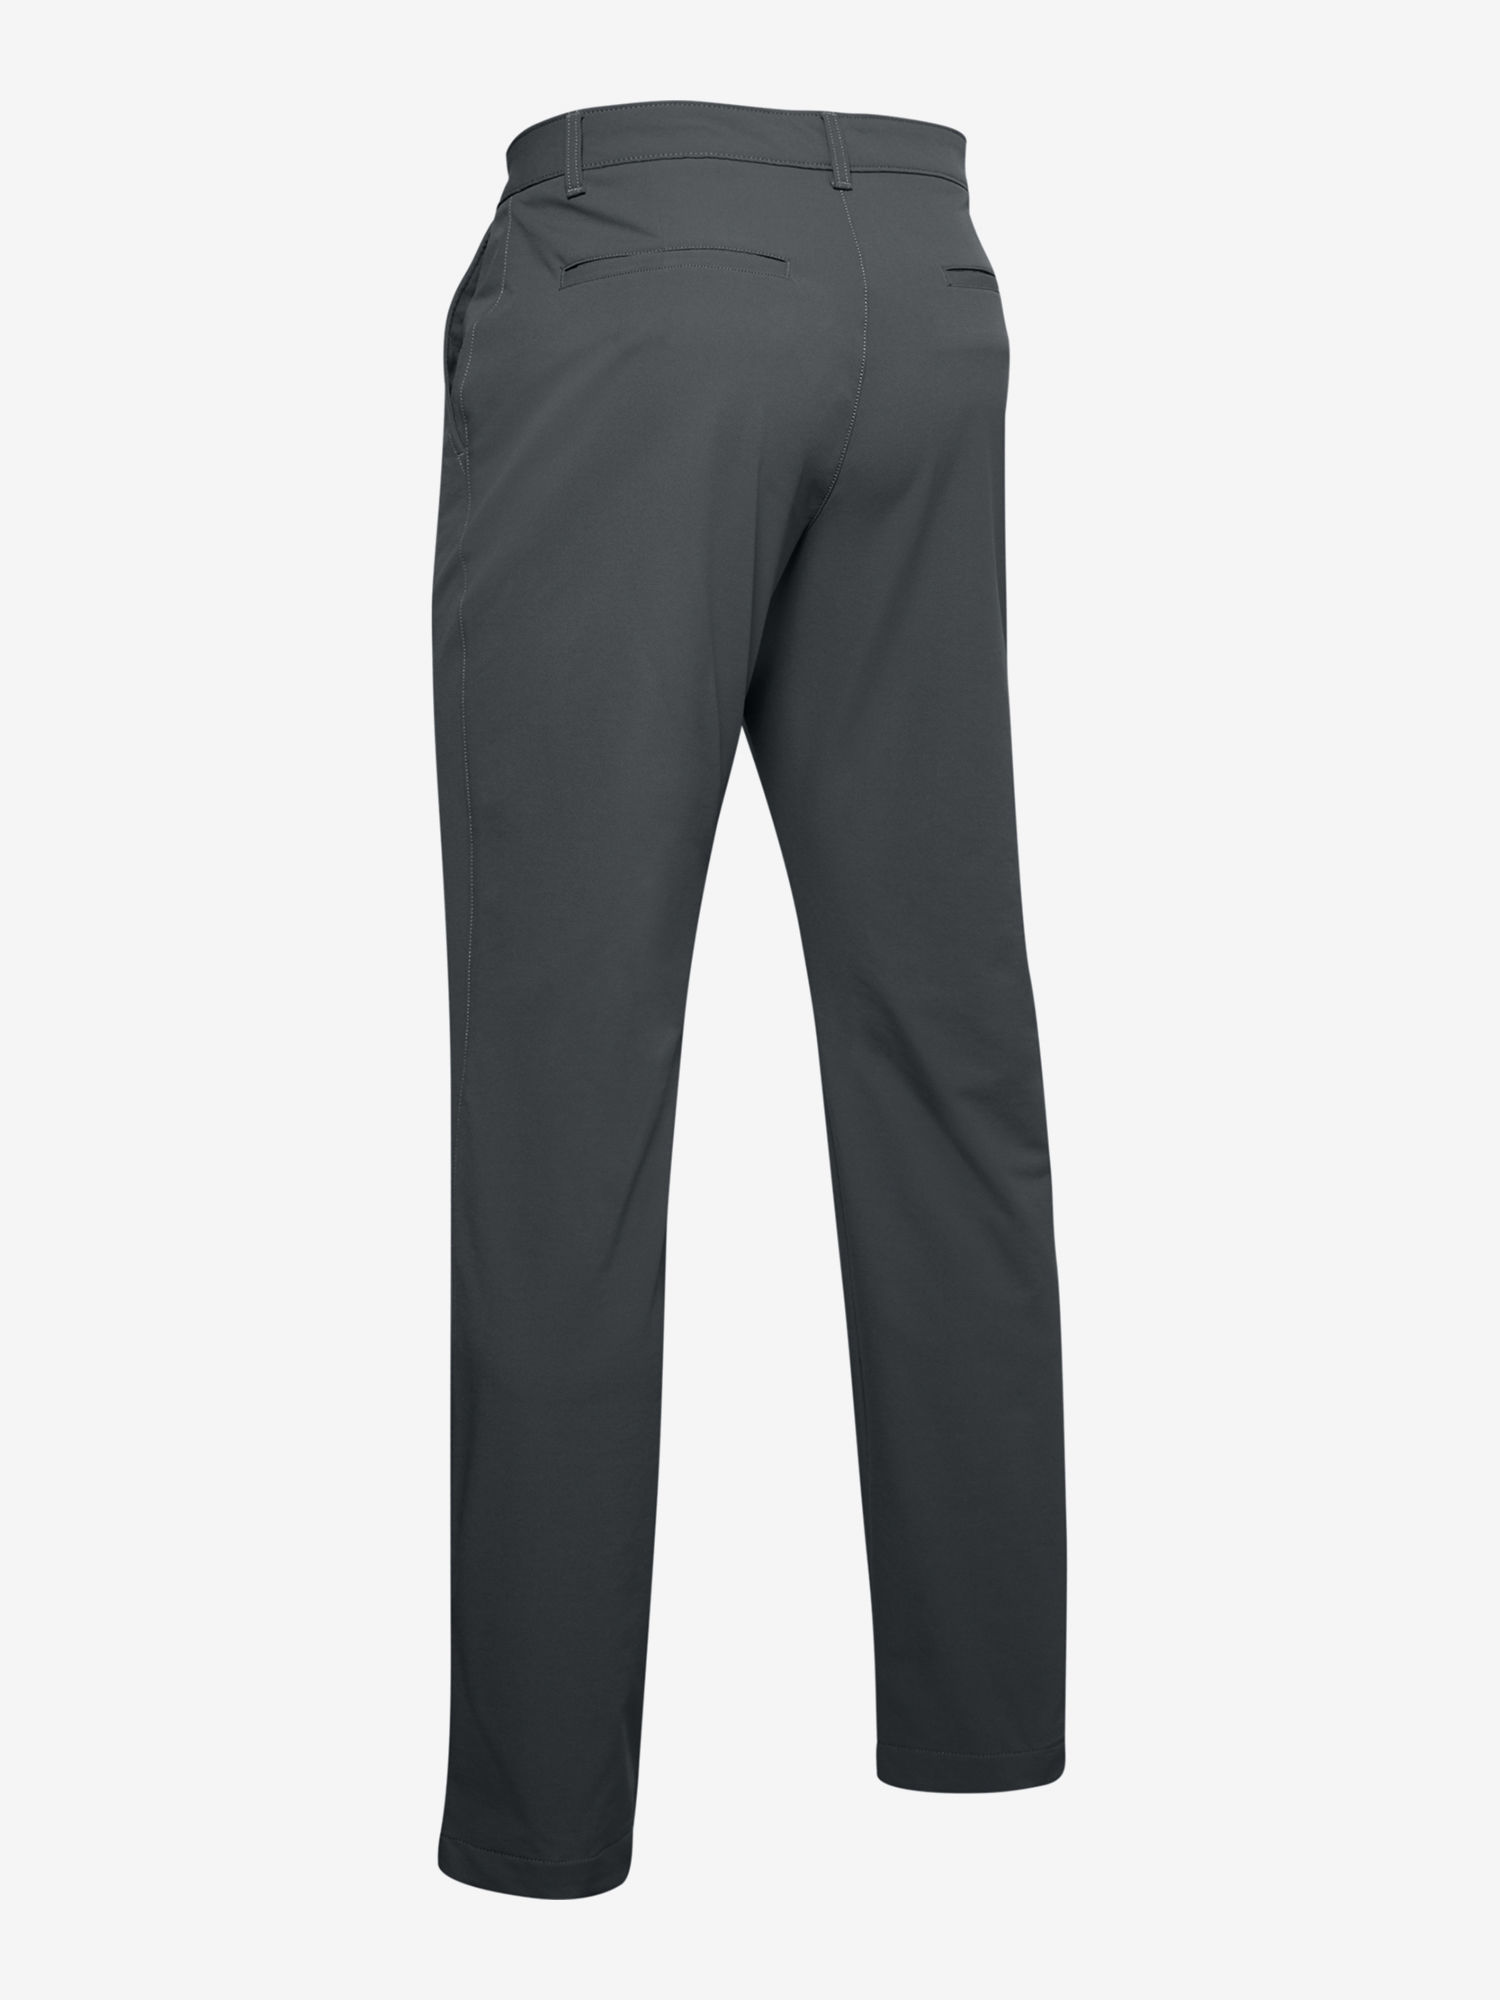 Nohavice Under Armour Tech Pant-GRY (5)